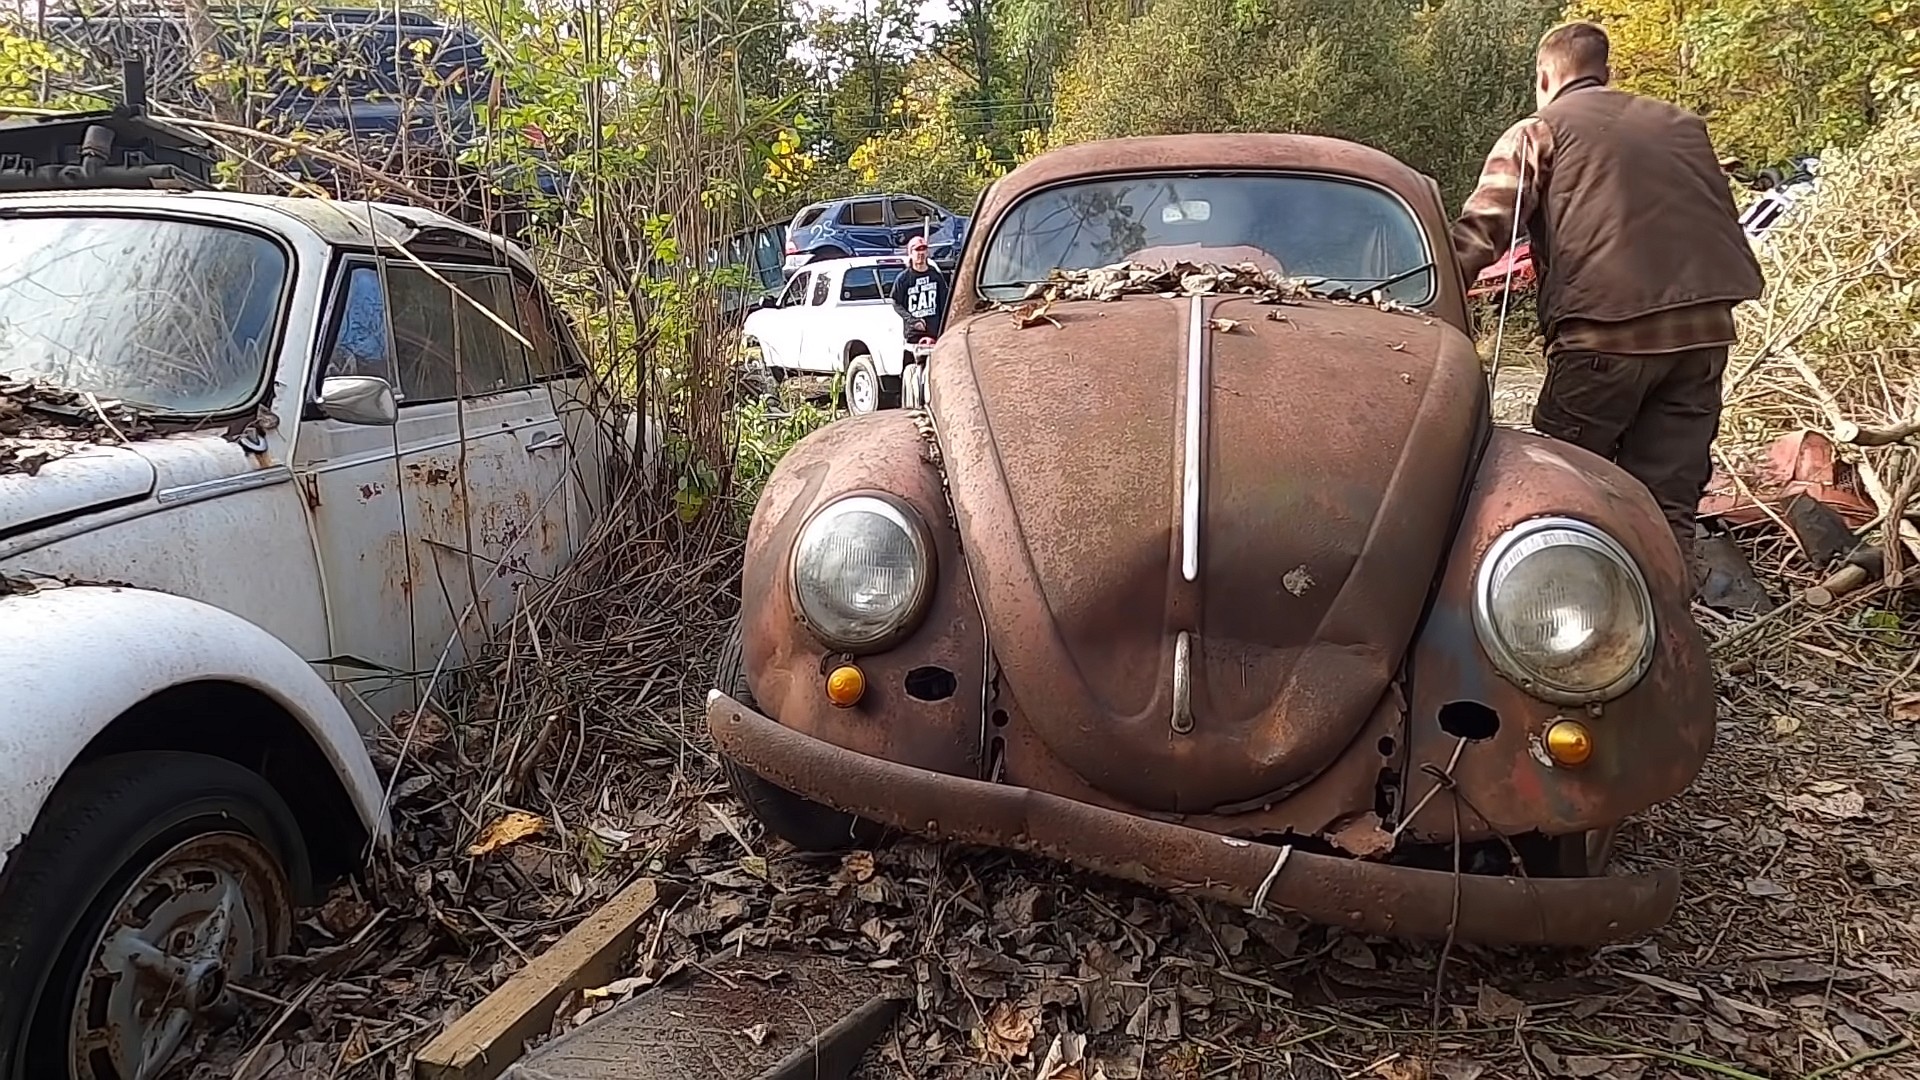 rare vw beetle spent 52 years in a junkyard gets rescued for full restoration 6